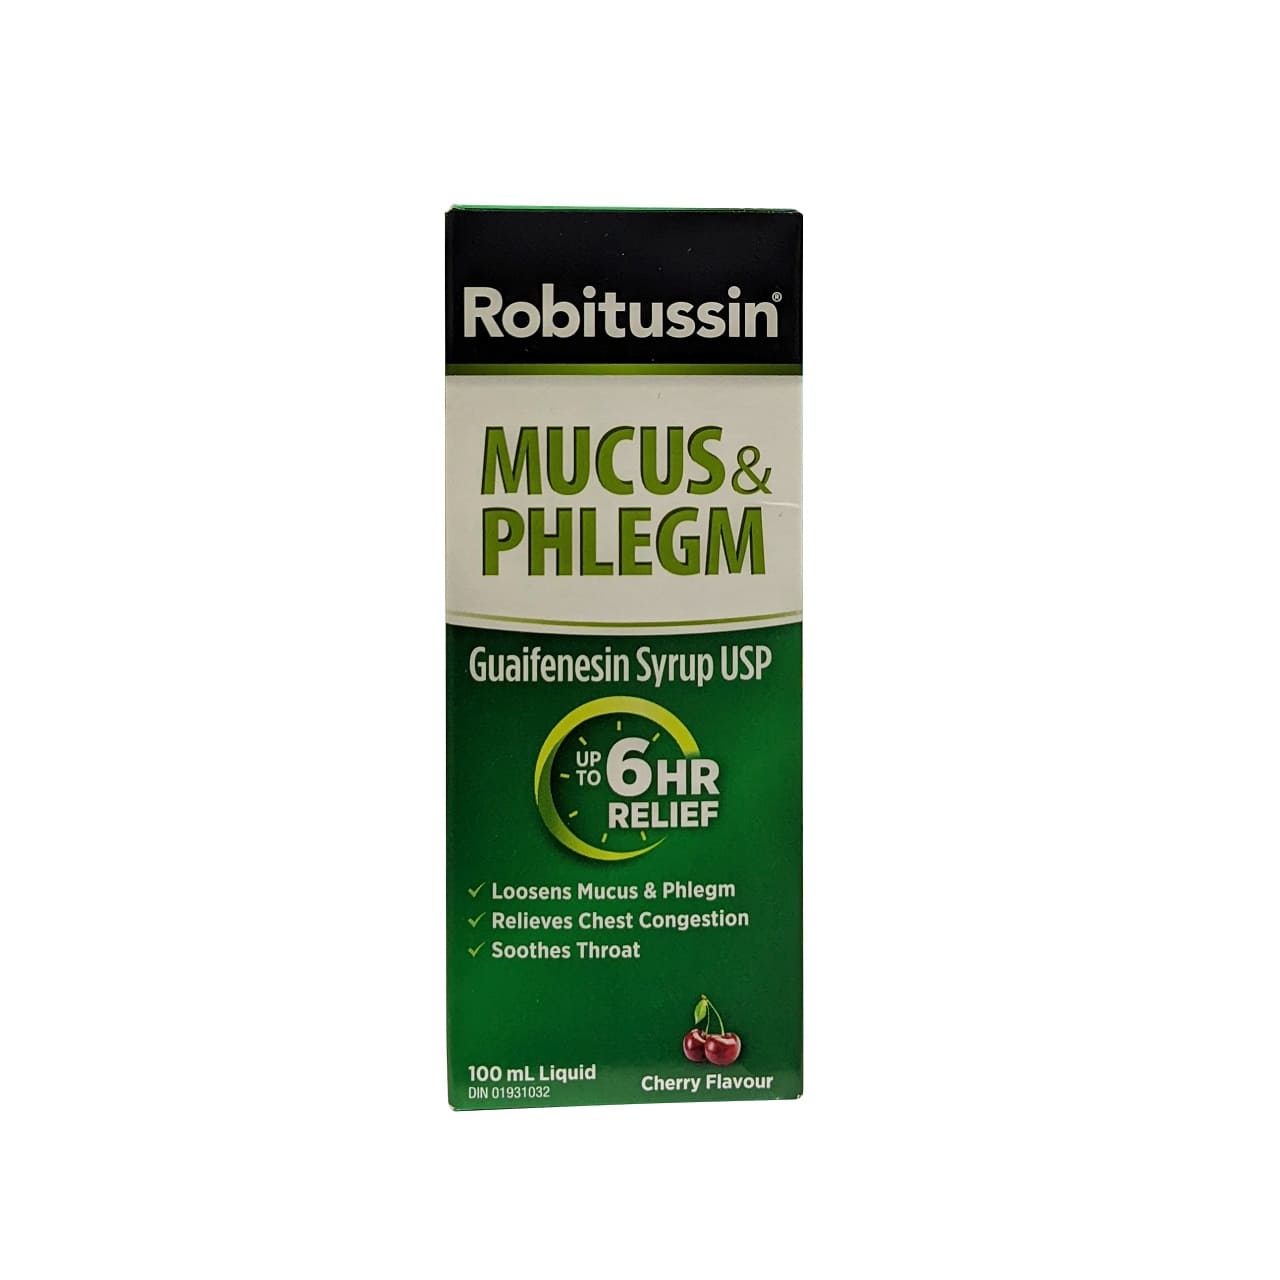 Product label for Robitussin Regular Strength Mucus & Phlegm for 6 Hours Relief (100 mL) in English